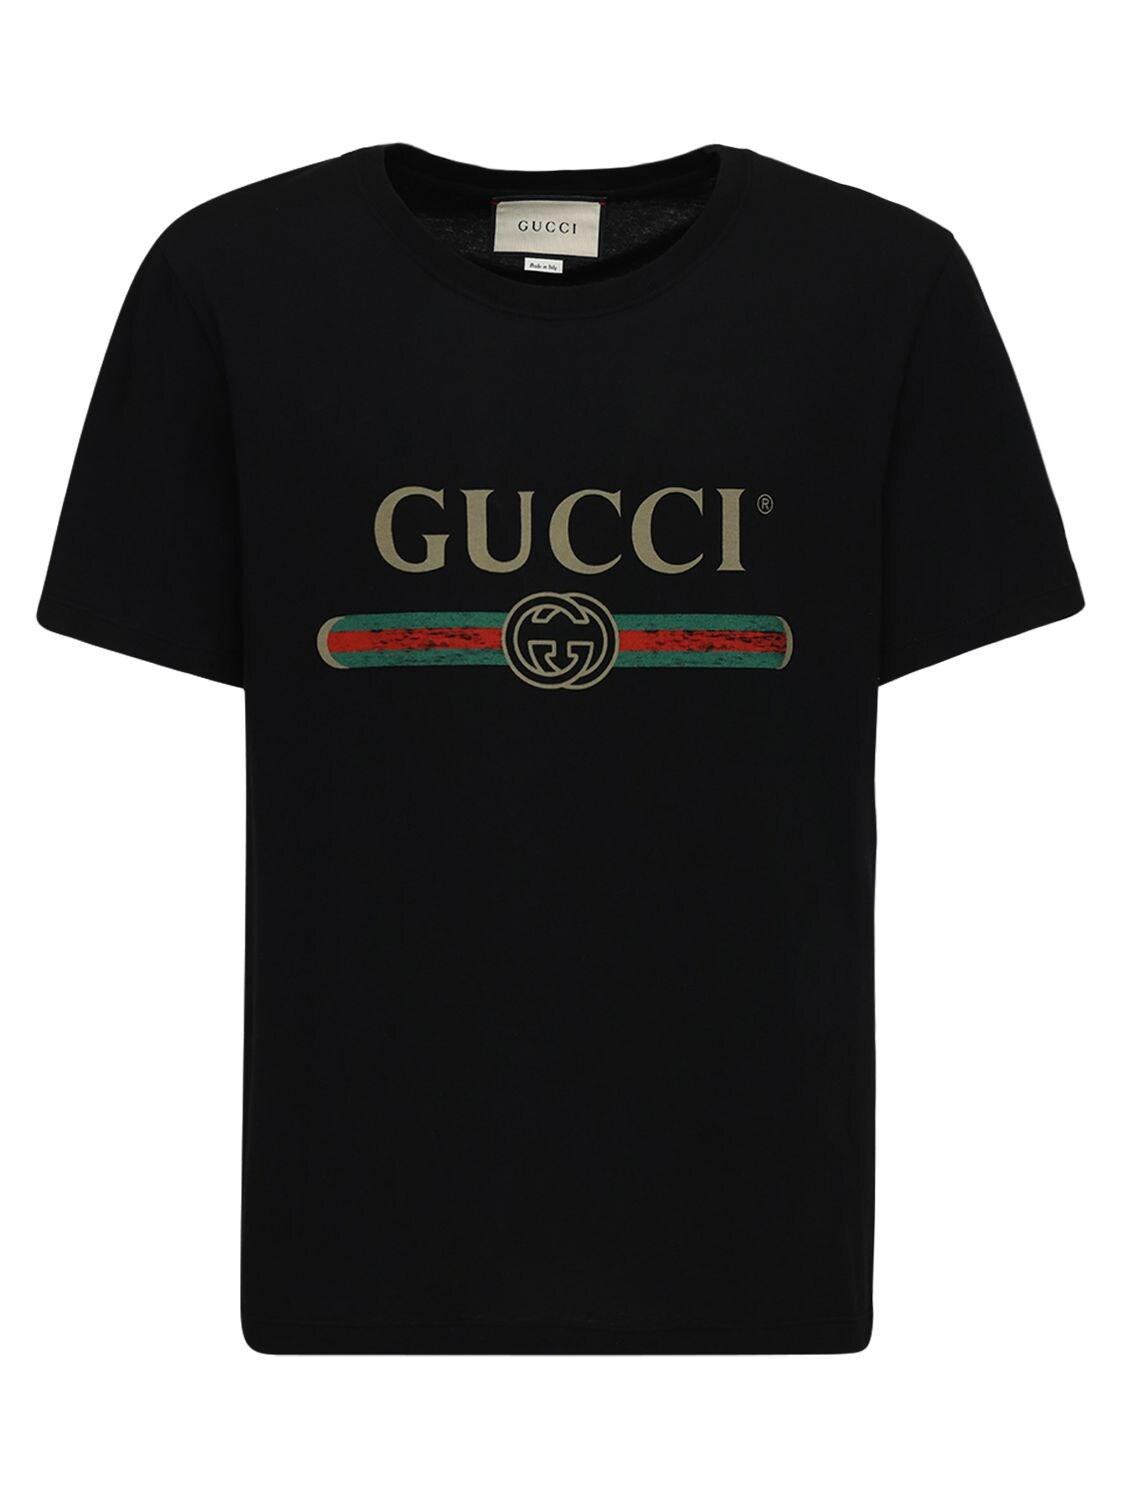 Gucci Cotton Distressed Fake Logo T Shirt in Black for Men - Save 37% ...